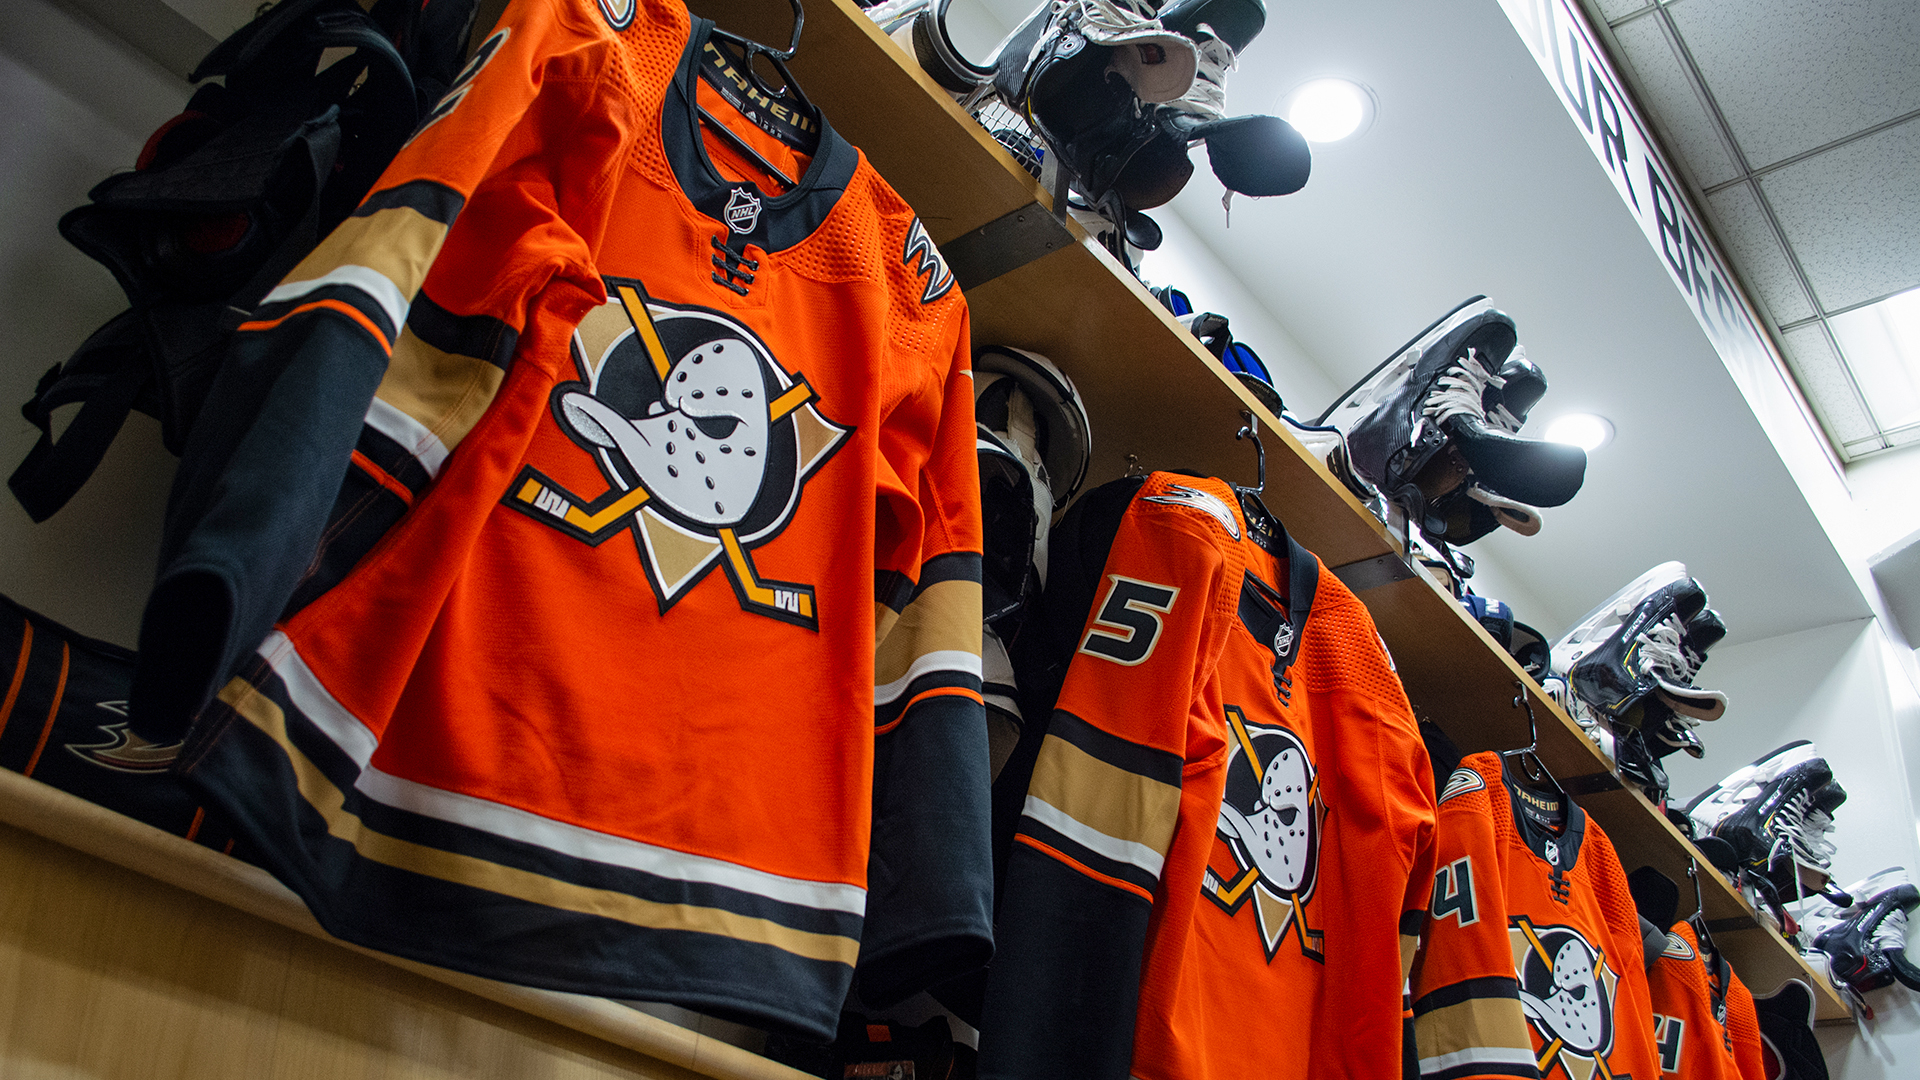 Anaheim Ducks celebrate roots with Mighty Ducks jerseys - Los Angeles Times